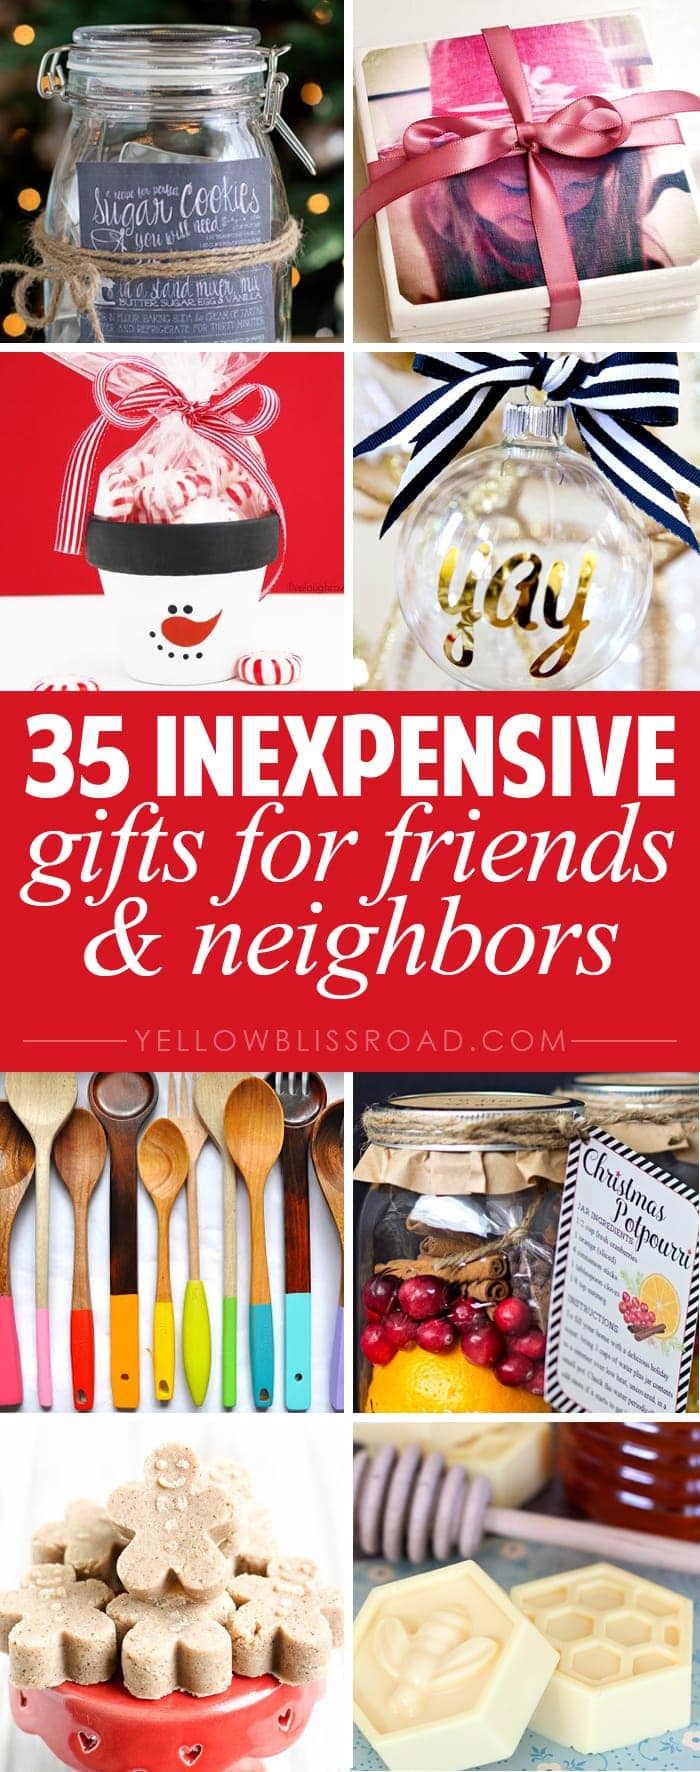 35 Gift Ideas for Neighbors and Friends - Yellow Bliss Road